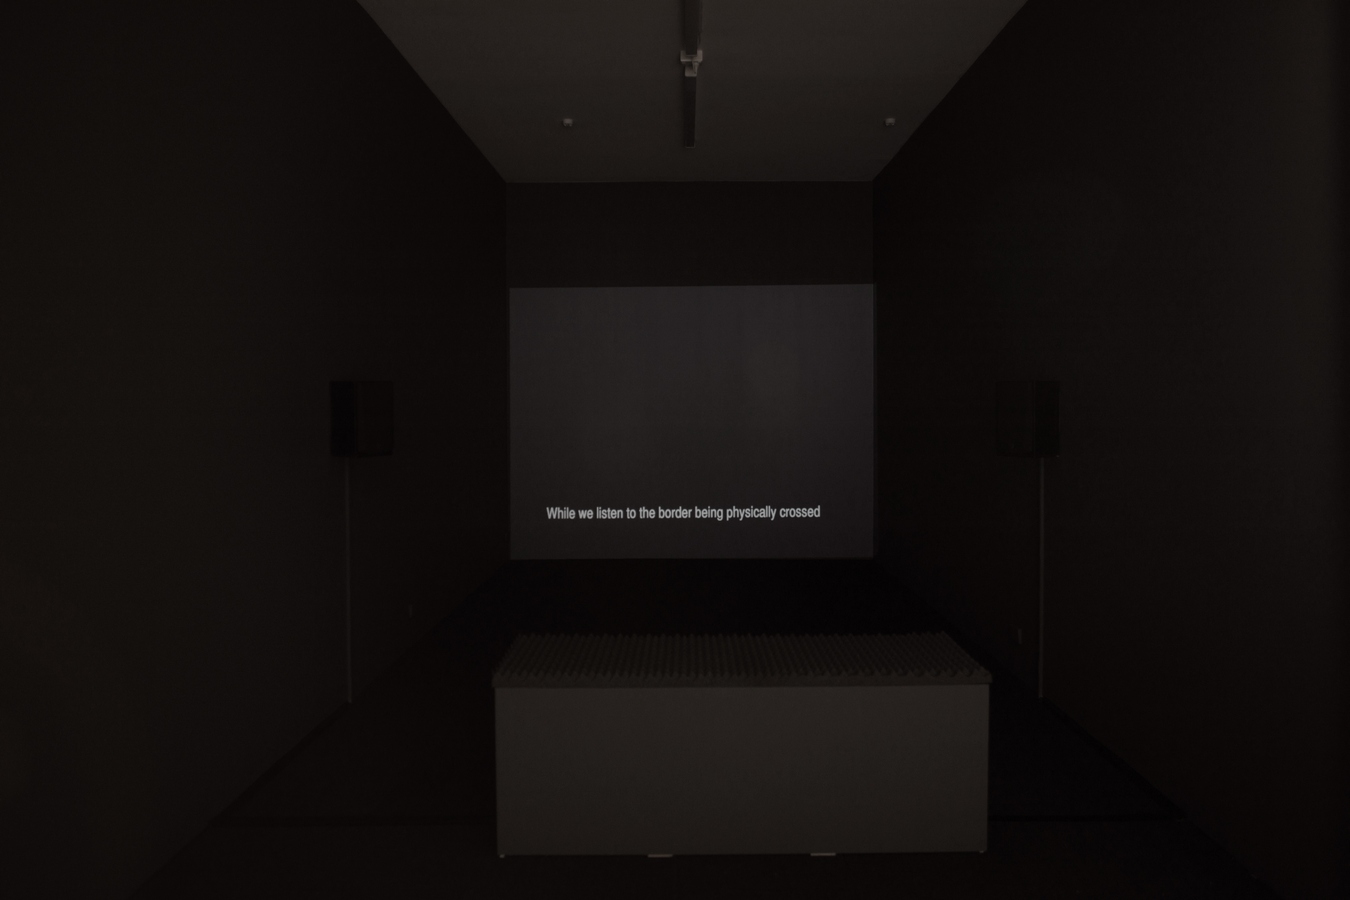 Image: Lawrence Abu Hamdan, Language Gulf in the Shouting Valley (installation view), 2013, video, 15:48 mins. Courtesy of Maureen Paley, London. Photo: Janneth Gil. 